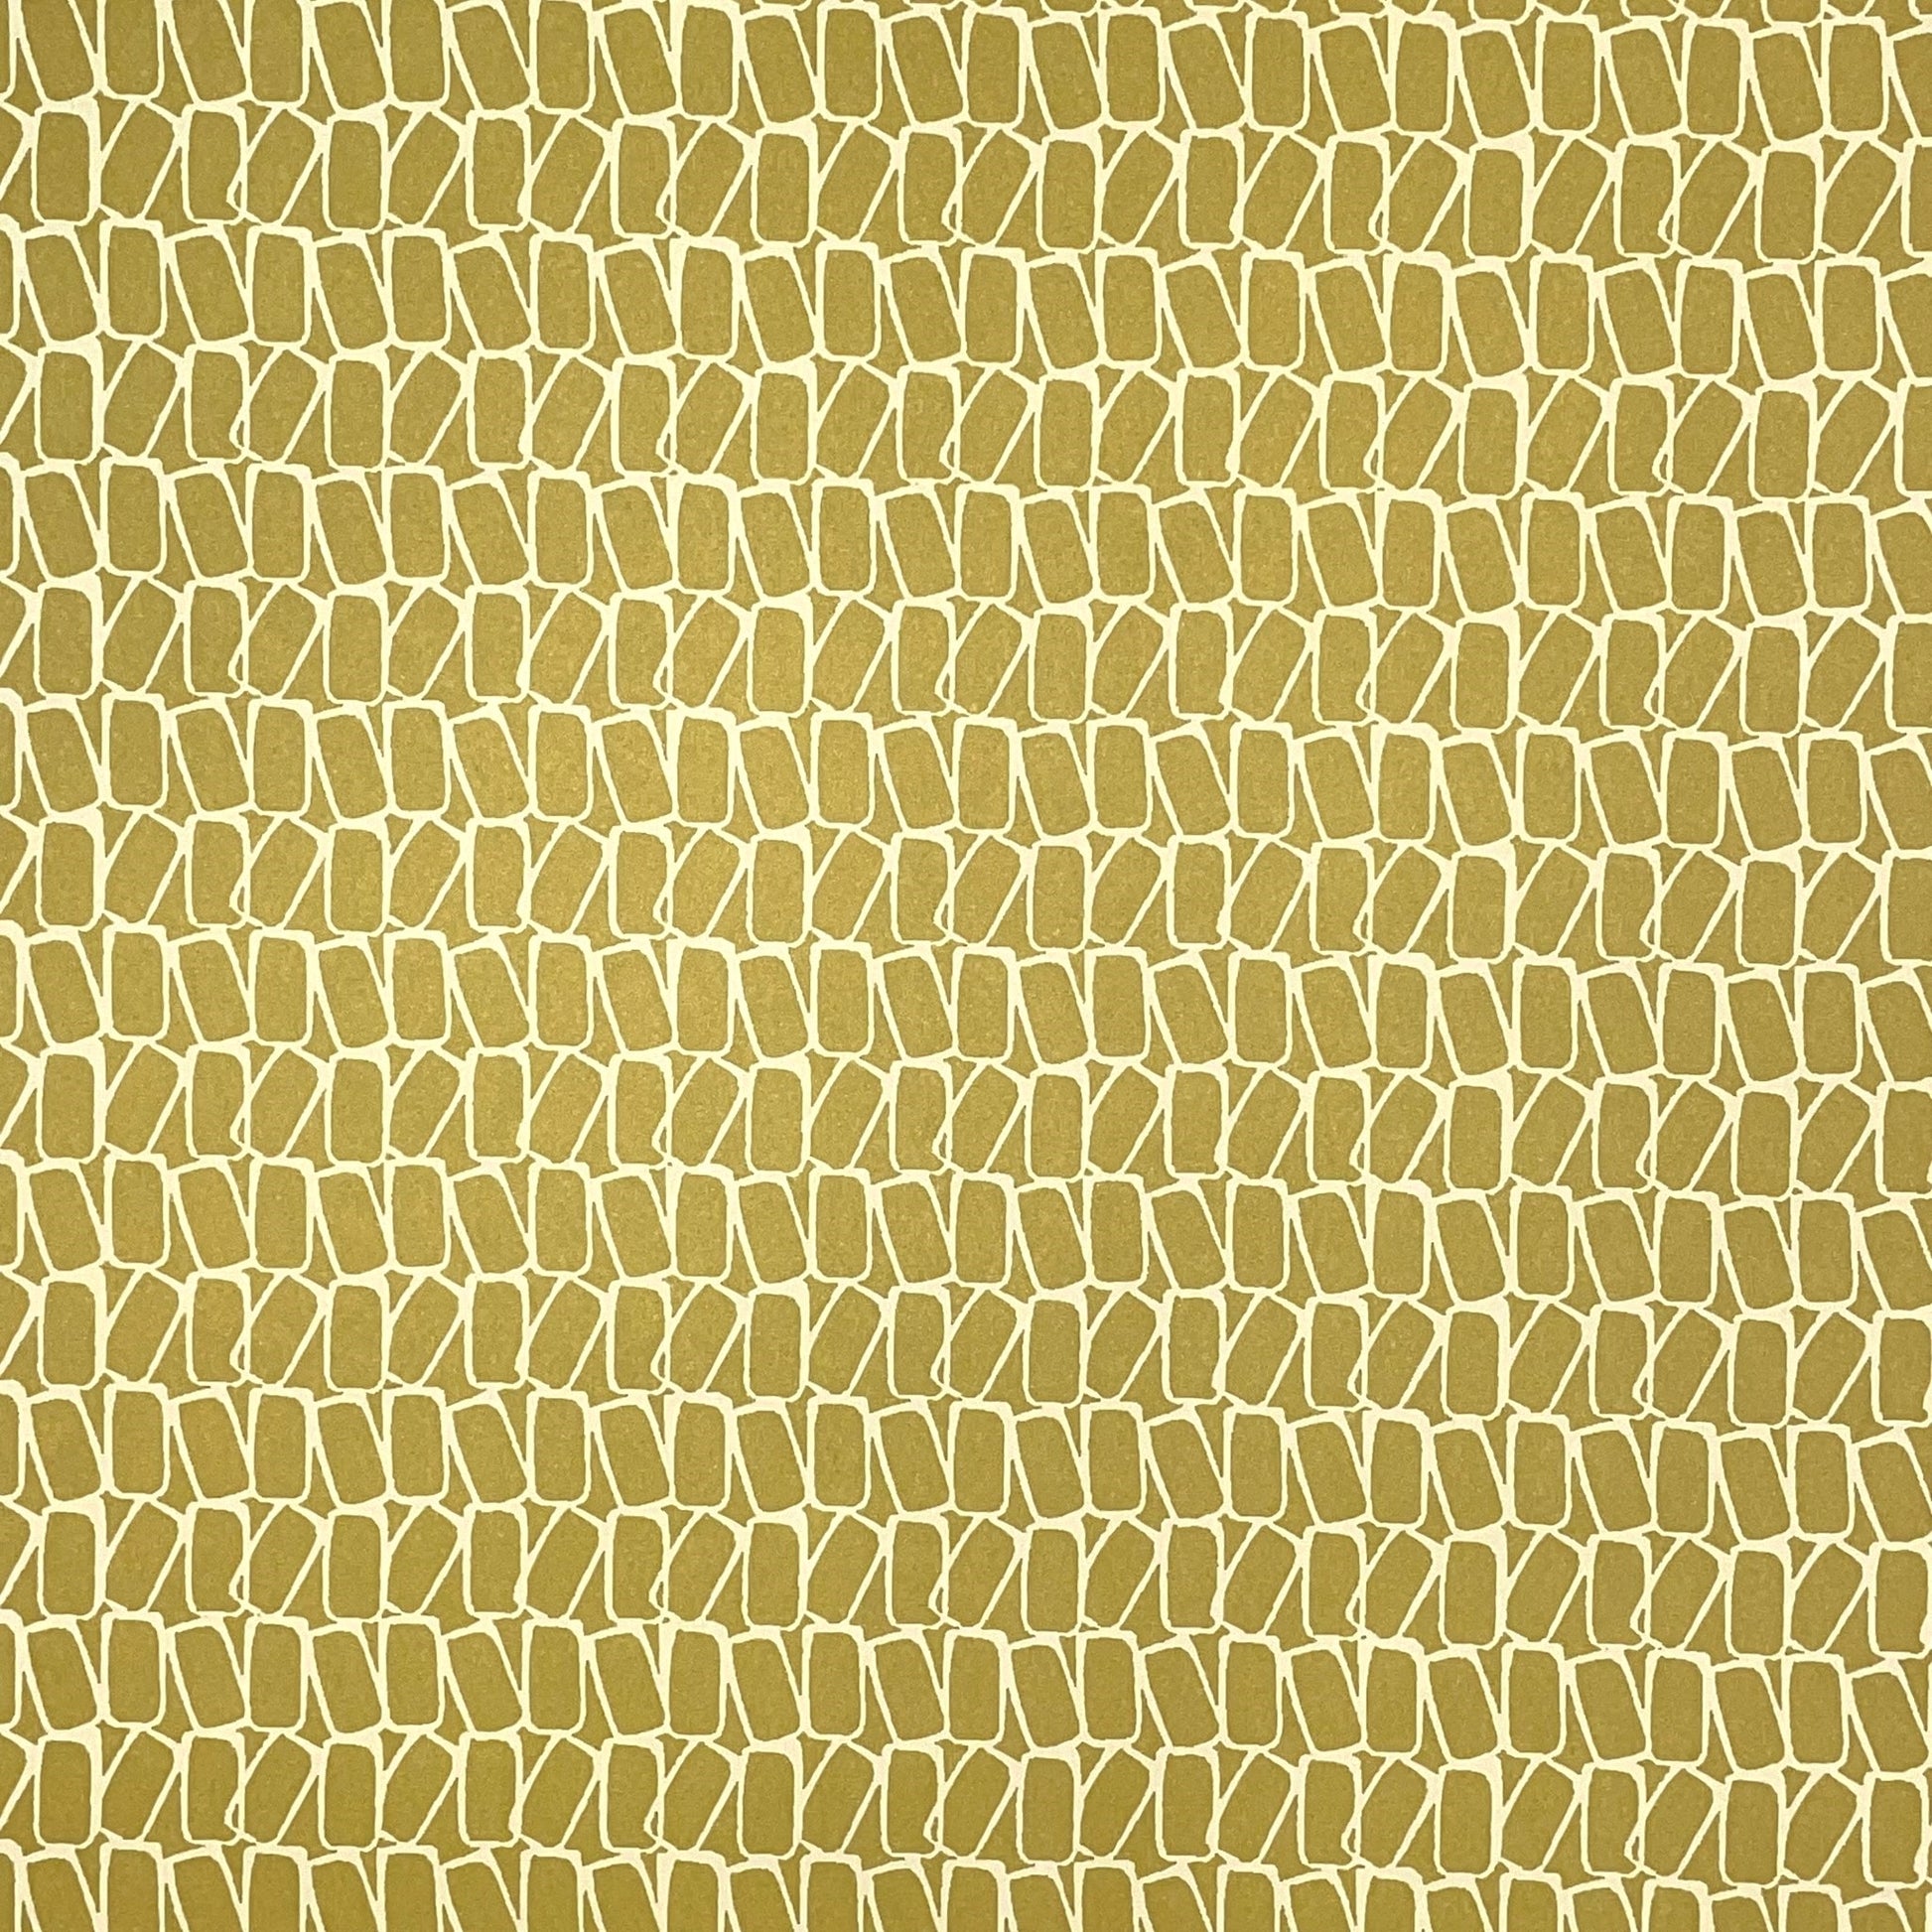 wrapping paper by Anne Davison Studio. Creamy domino outlined shapes on a mustard background.